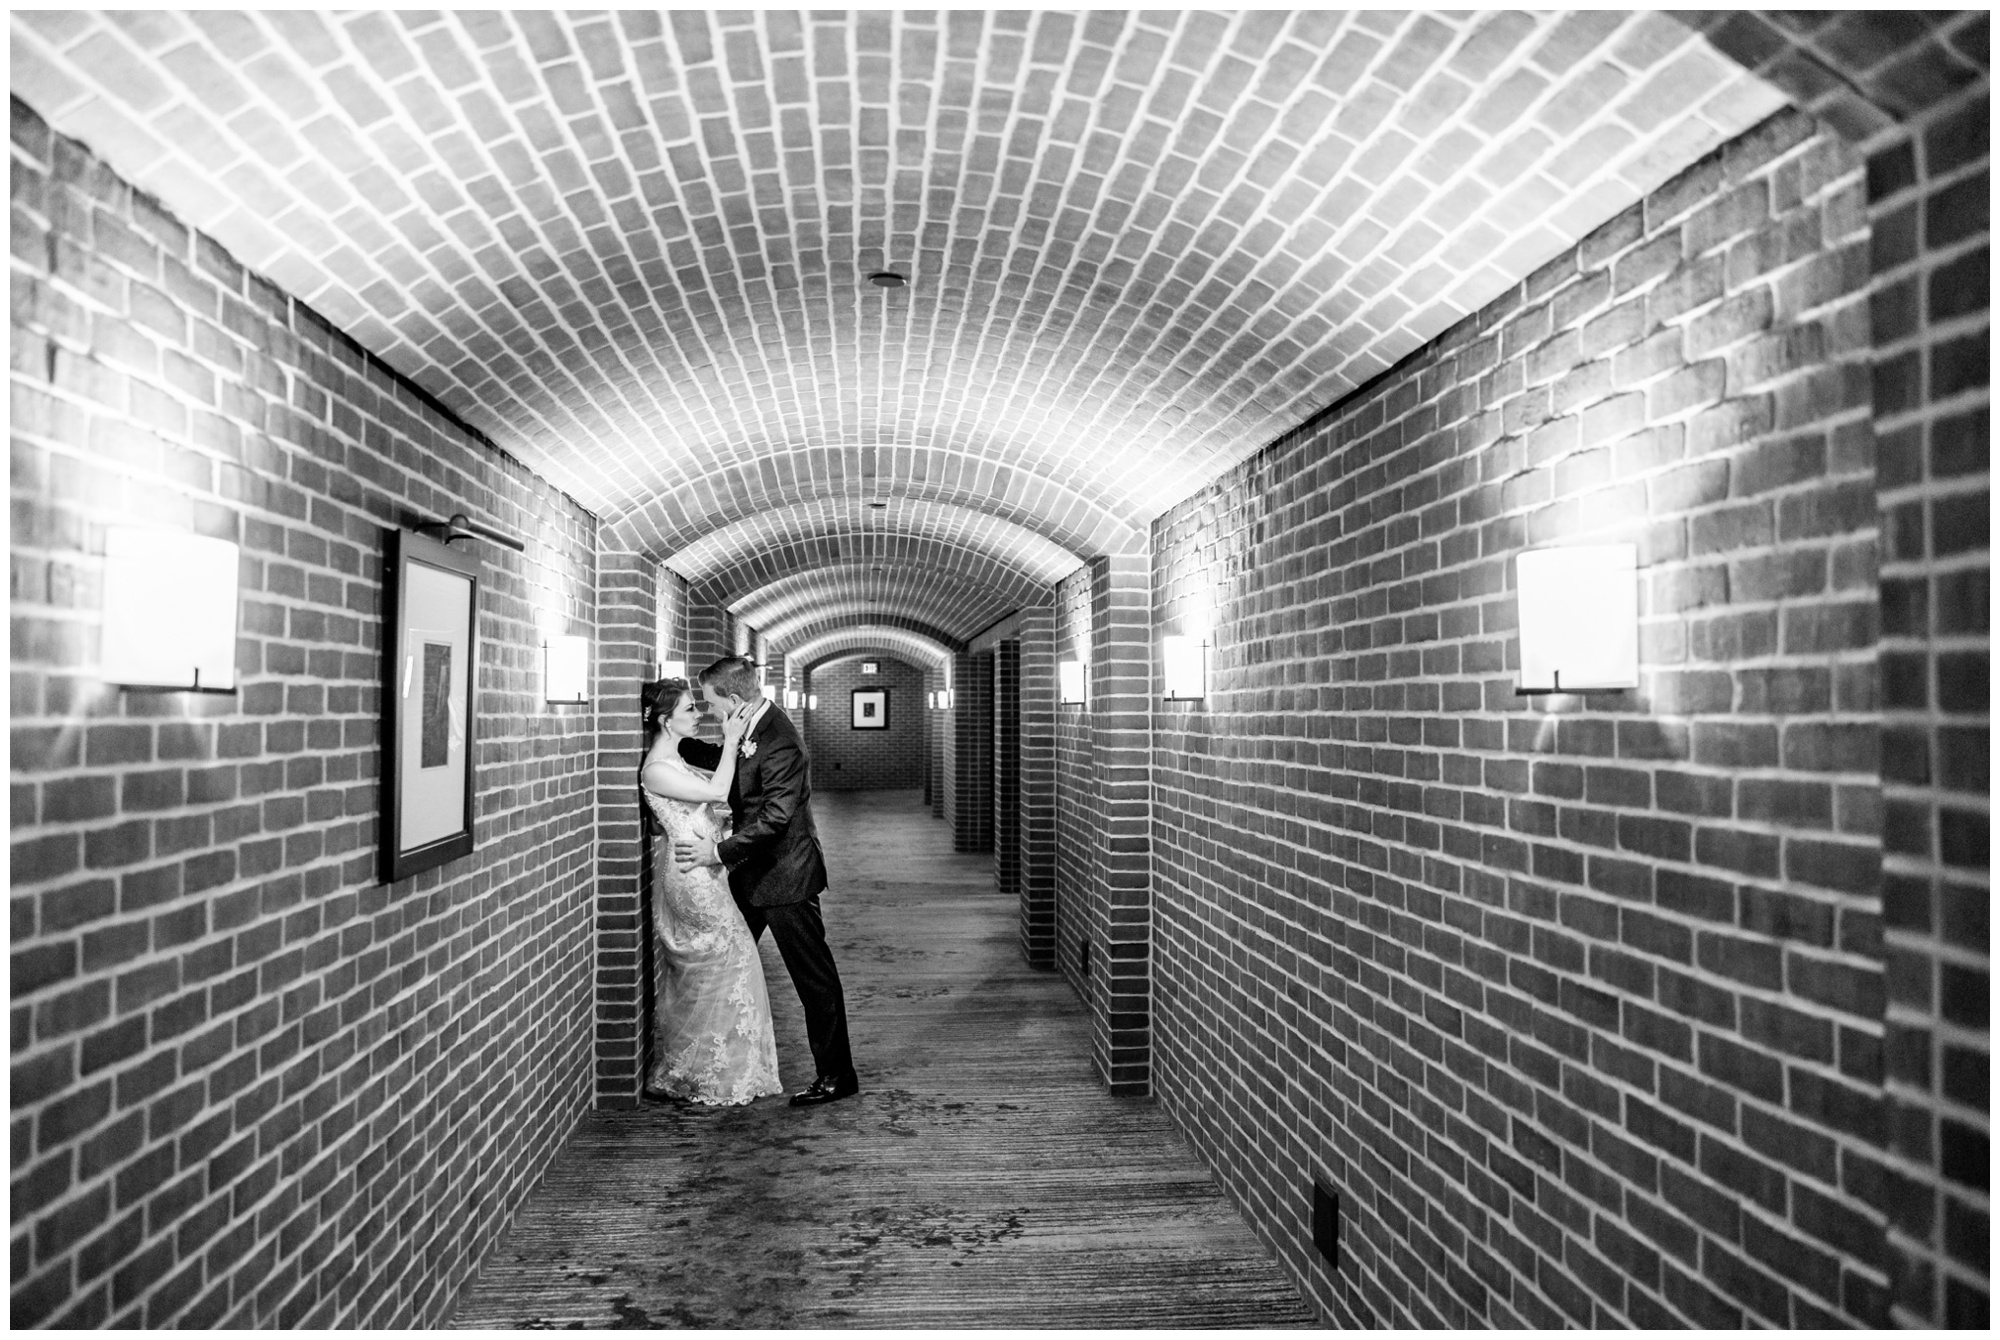 romantic Ritz Carlton Georgetown wedding, summer wedding aesthetic, green and white aesthetic, summer D.C. wedding, D.C. wedding venues, Ritz Carlton wedding, Washington D.C. wedding, romantic wedding aesthetic, Georgetown wedding, Rachel E.H. Photography, D.C. photographer, bride and groom against wall, brick tunnel, black and white